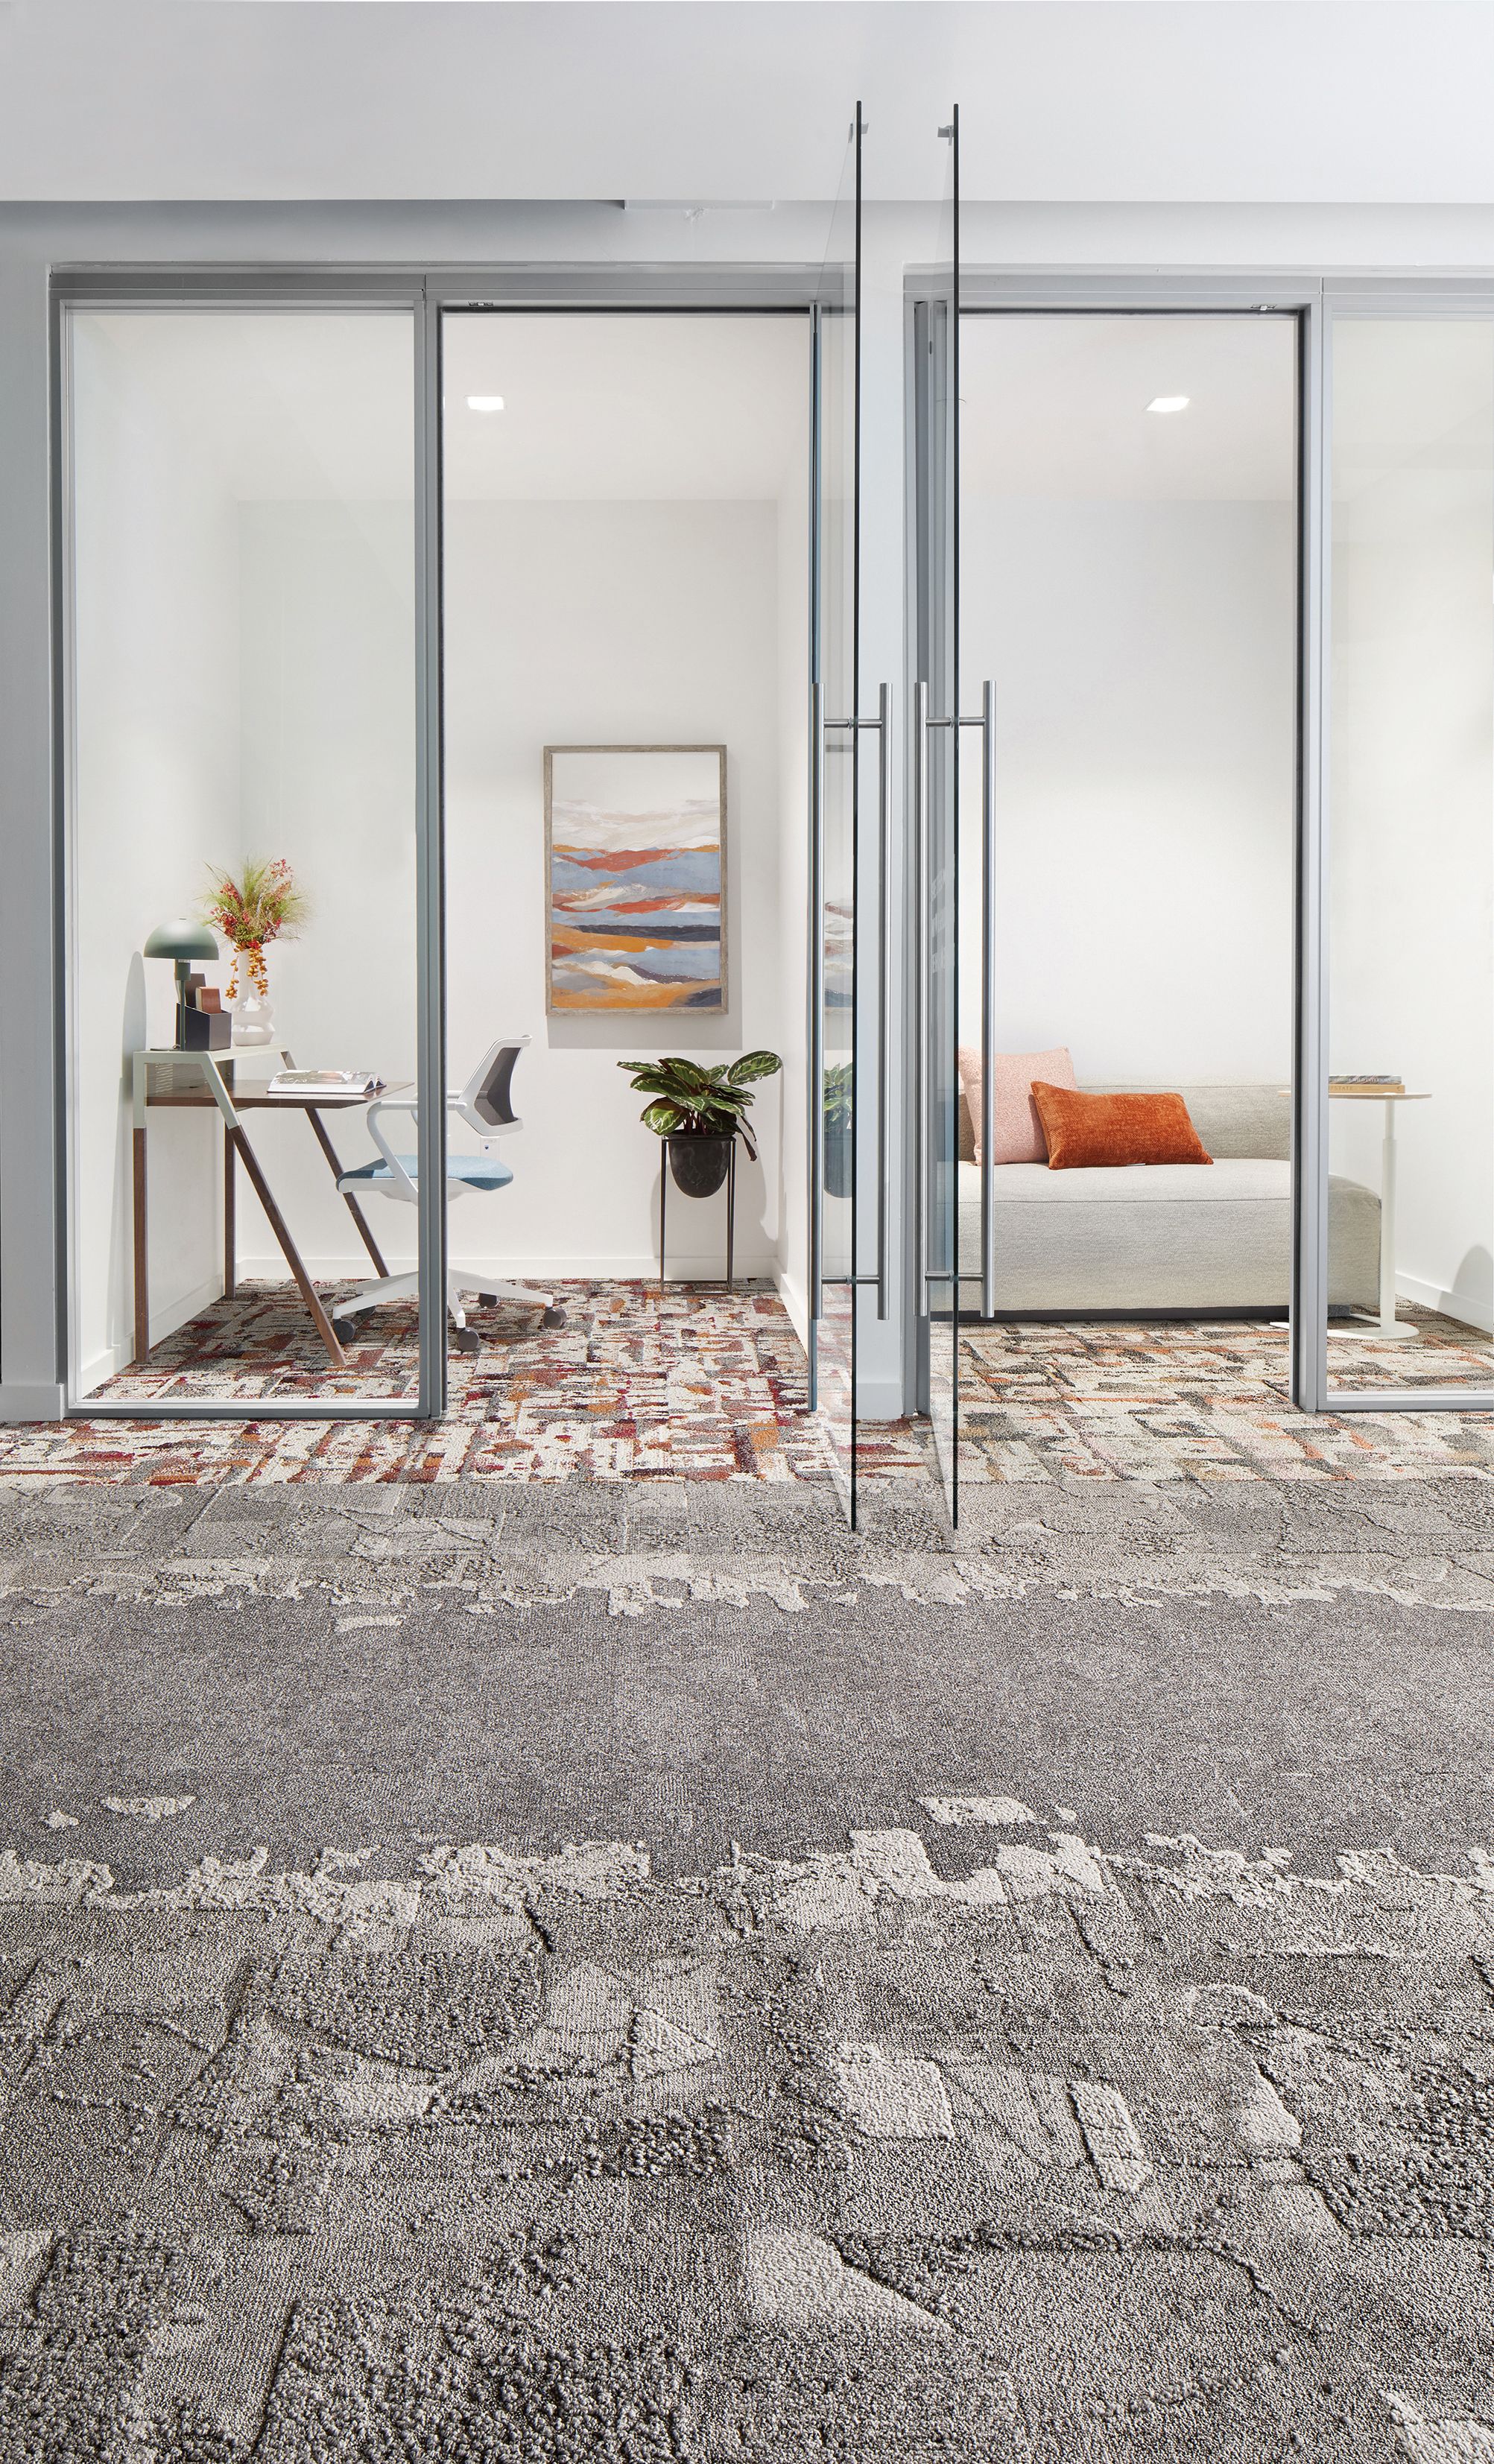 Interface Bridge Creek, Mountain Rock, Flat Rock and Panola Mountain carpet tile in office with glass-enclosed meeting spaces numéro d’image 8